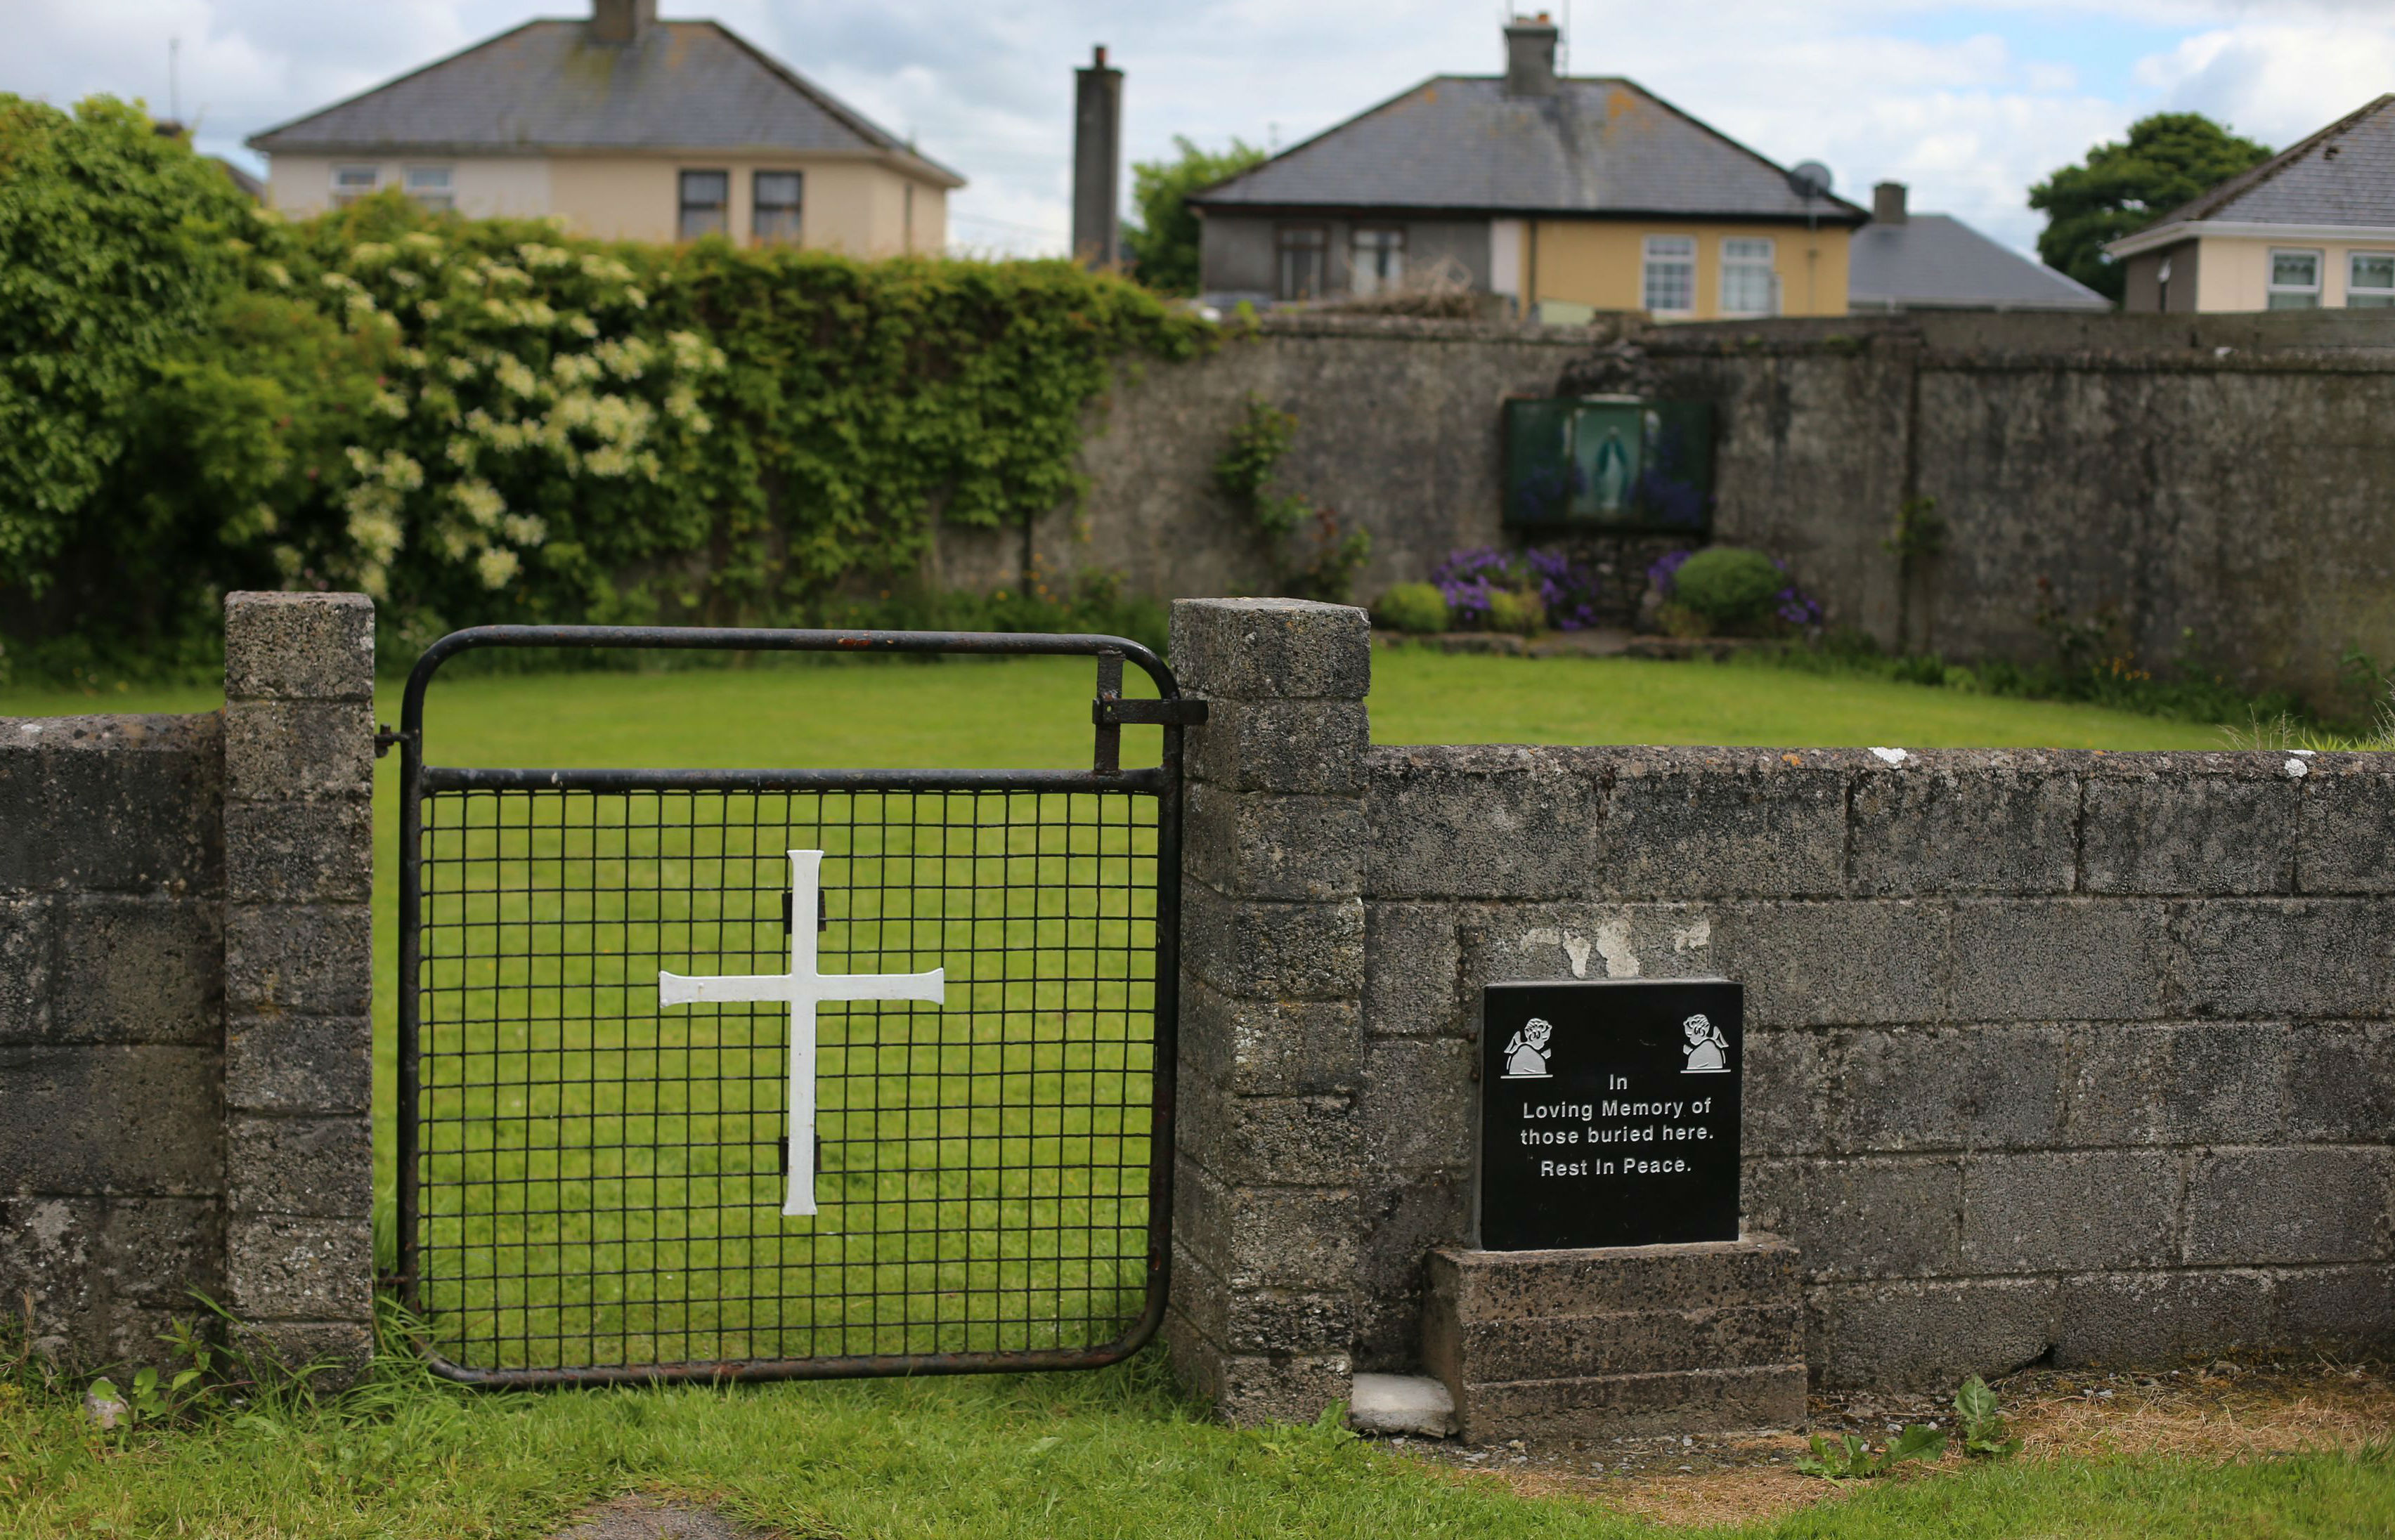 Irish government calls on Church to help pay for Tuam mother and baby home excavation  